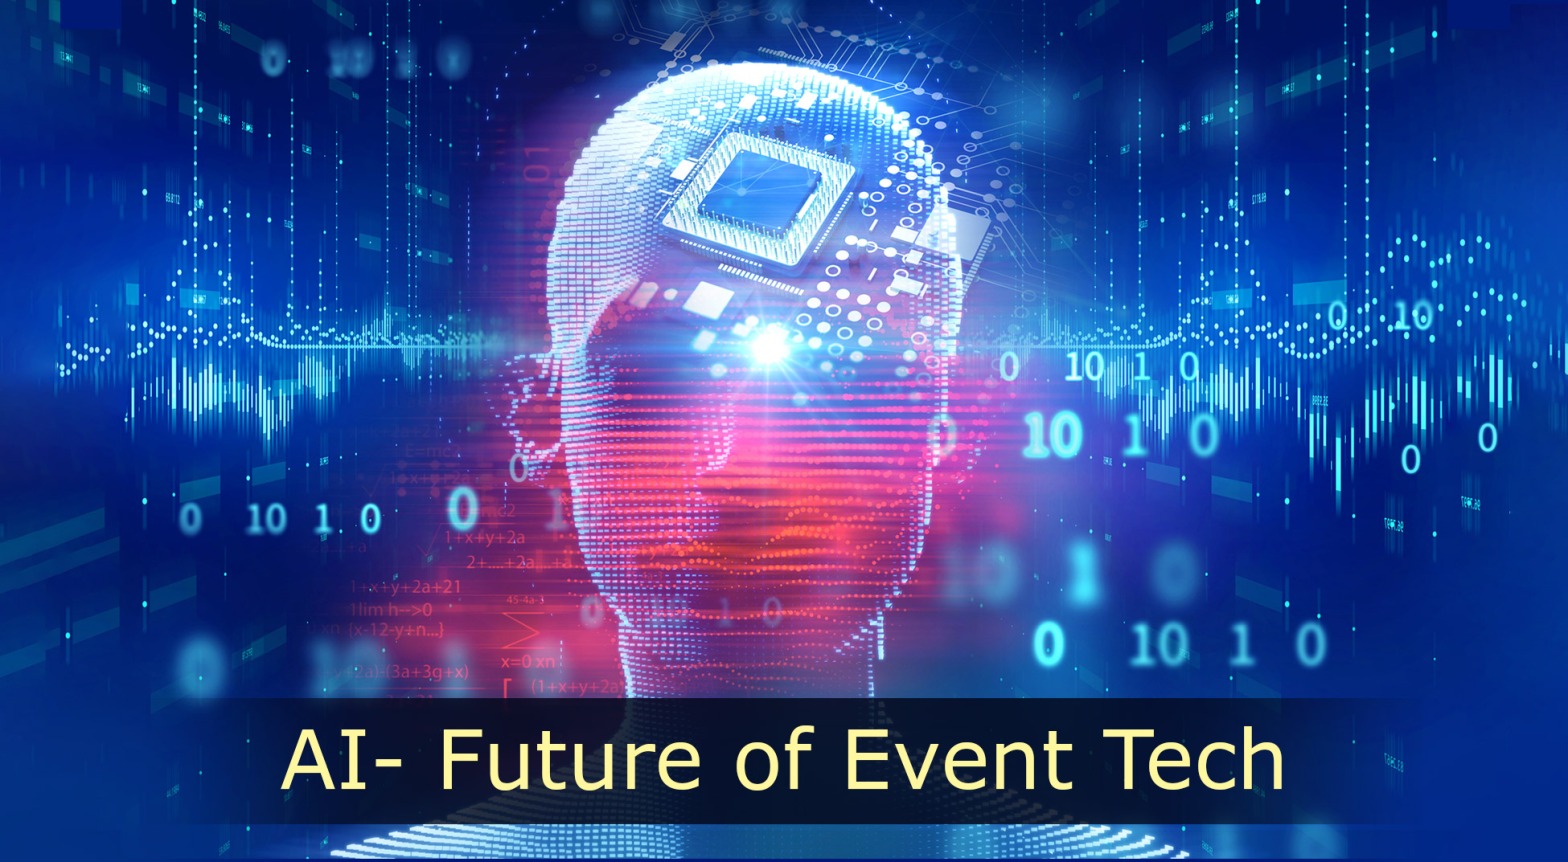 AI can Play Pivotal Role to Shape New Event Tech